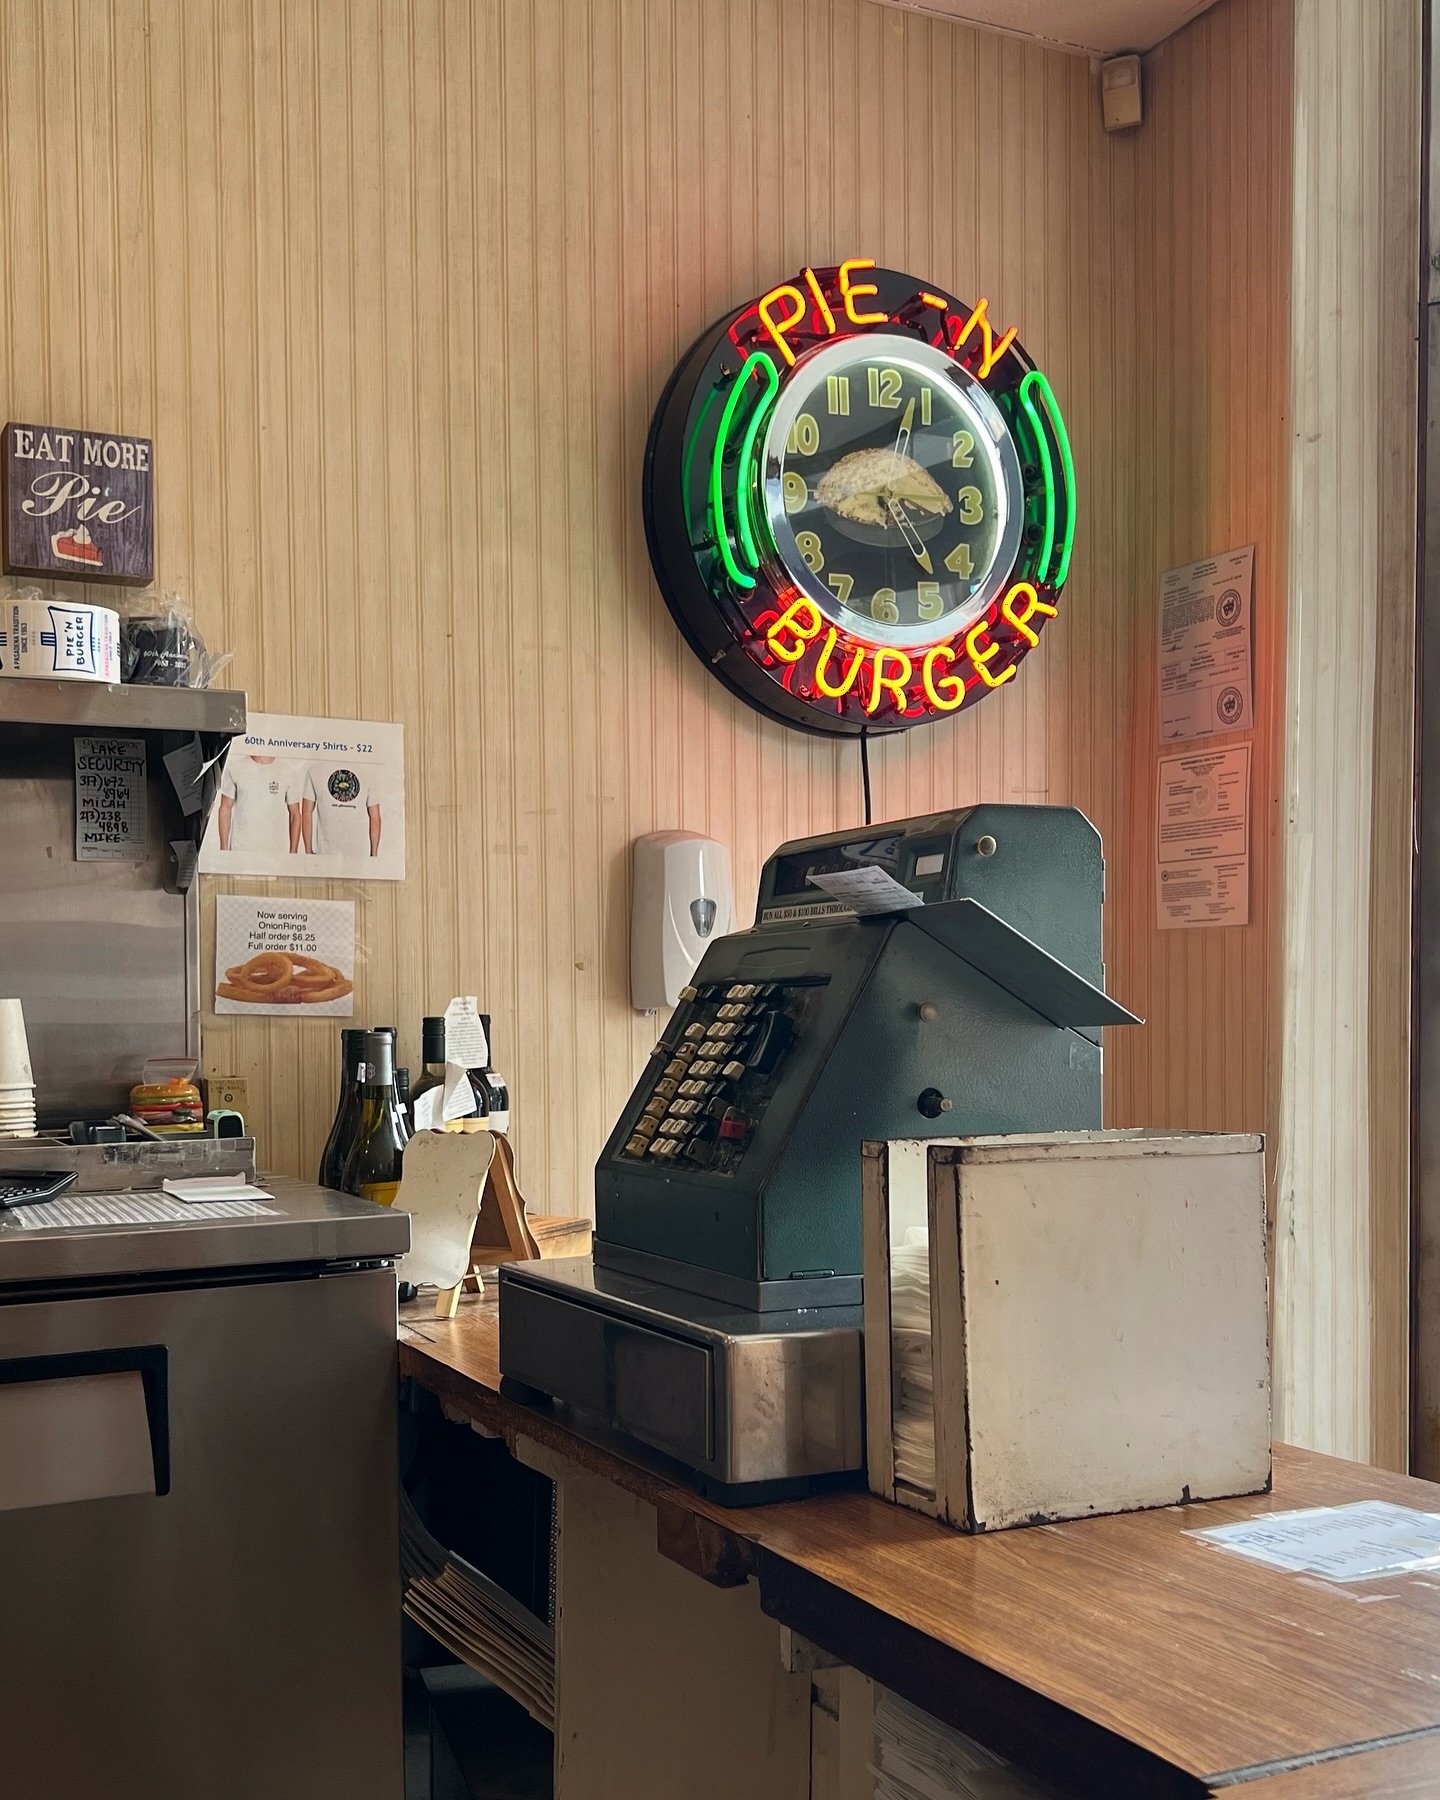 Opened in 1963, Pasadena&rsquo;s Pie &lsquo;n Burger is a living legend&mdash;and one of my favorite lunch spots in town. The classic soda fountain, Formica counters, and mechanical cash register are just some of the vintage Americana details that wi